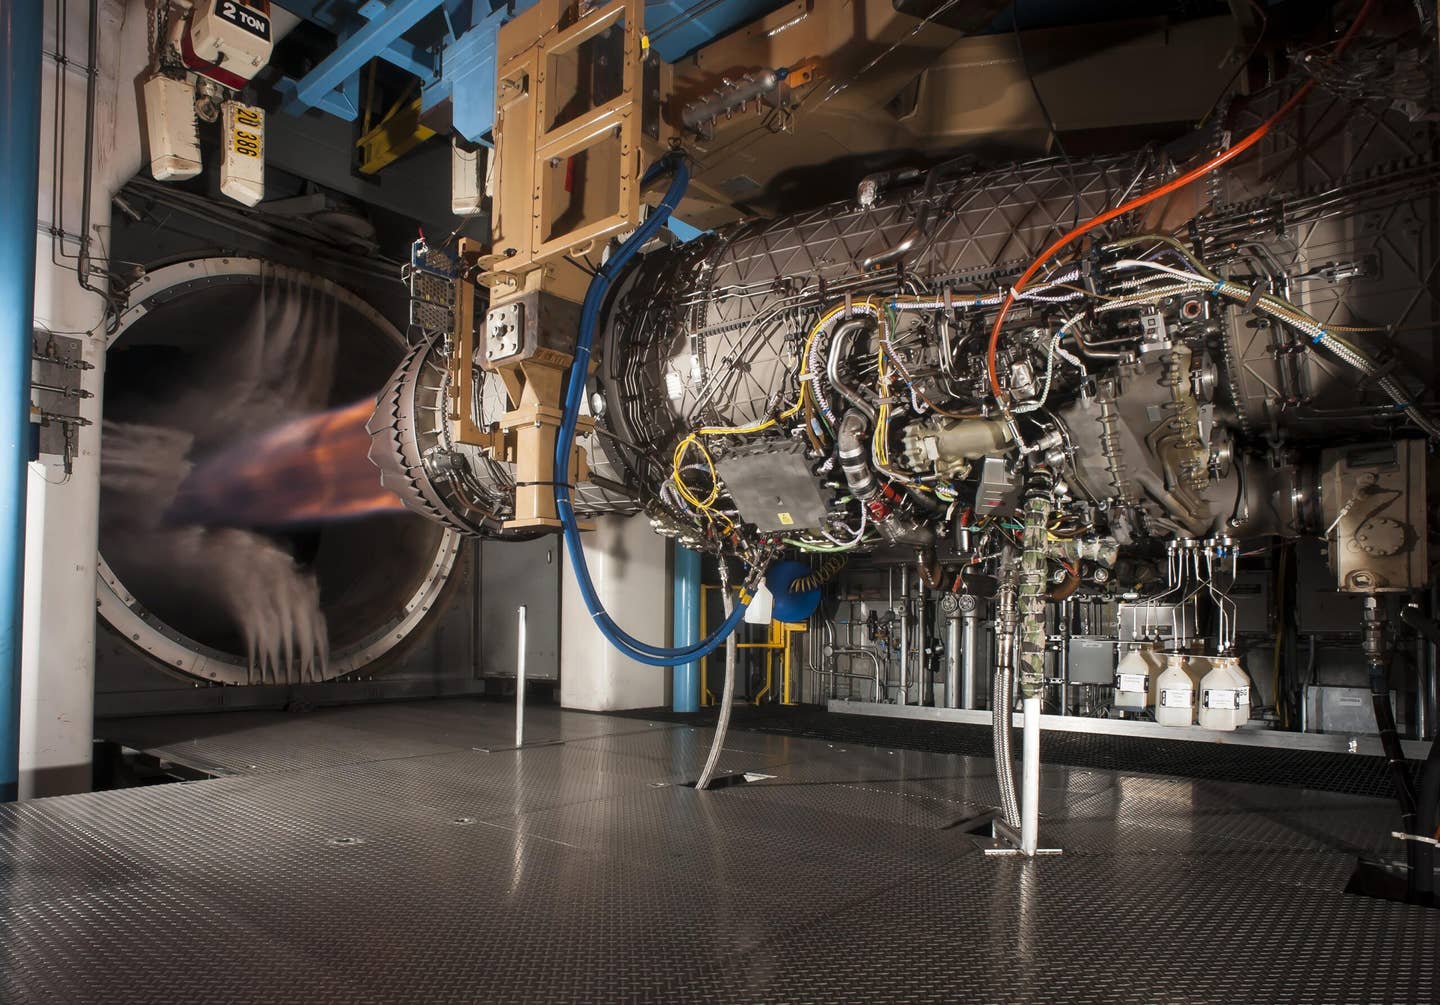 Pratt &amp; Whitney’s F135 engine, as used in the F-35, during mission testing at the Arnold Engineering Development Complex. <em>Courtesy photo/Rick Goodfriend</em>